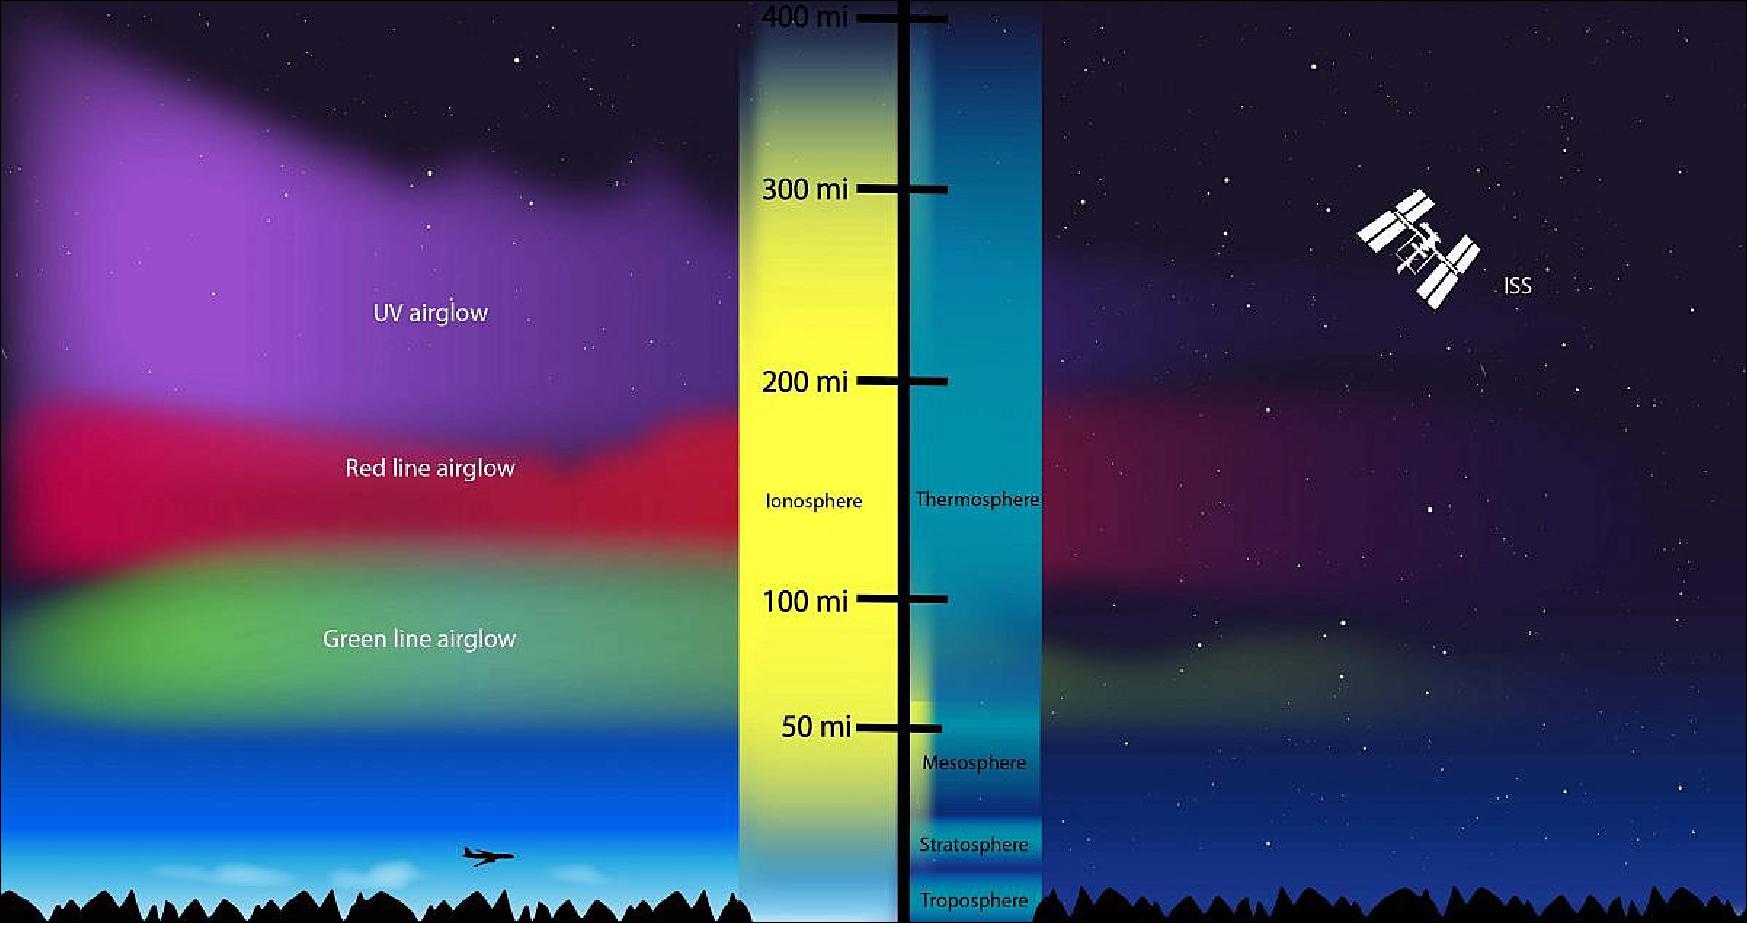 Figure 11: The thermosphere is the highest and hottest atmospheric layer, where the ISS flies and the aurora and airglow can be observed (image credits: NASA’s Goddard Space Flight Center/Genna Duberstein)